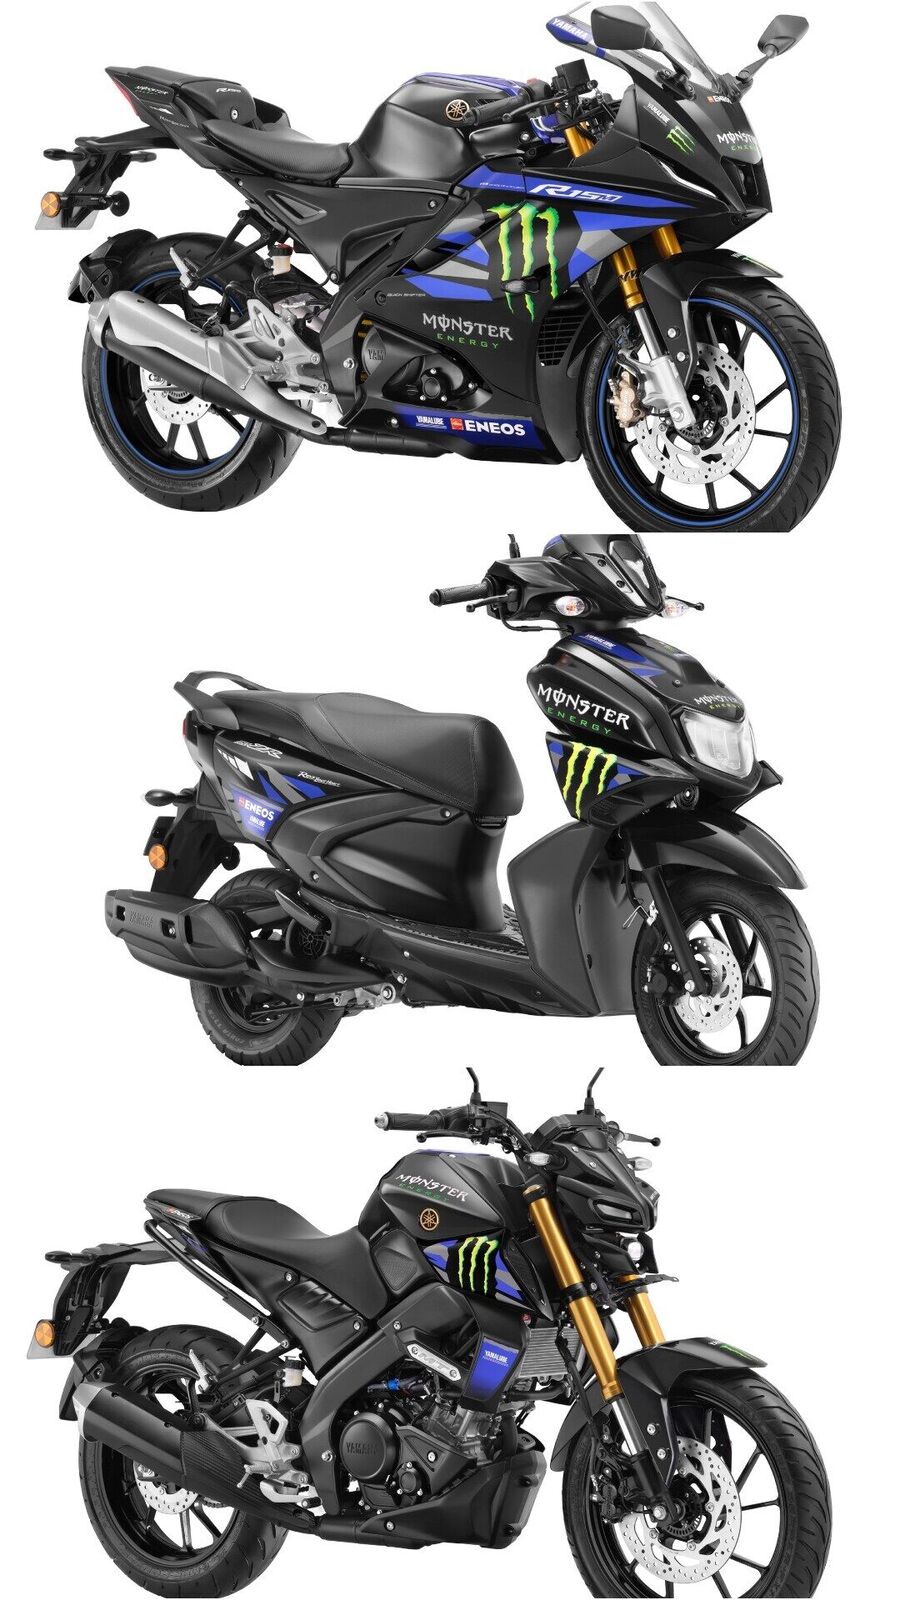 2023 Yamaha MotoGP Edition launched across range. Check out what's new